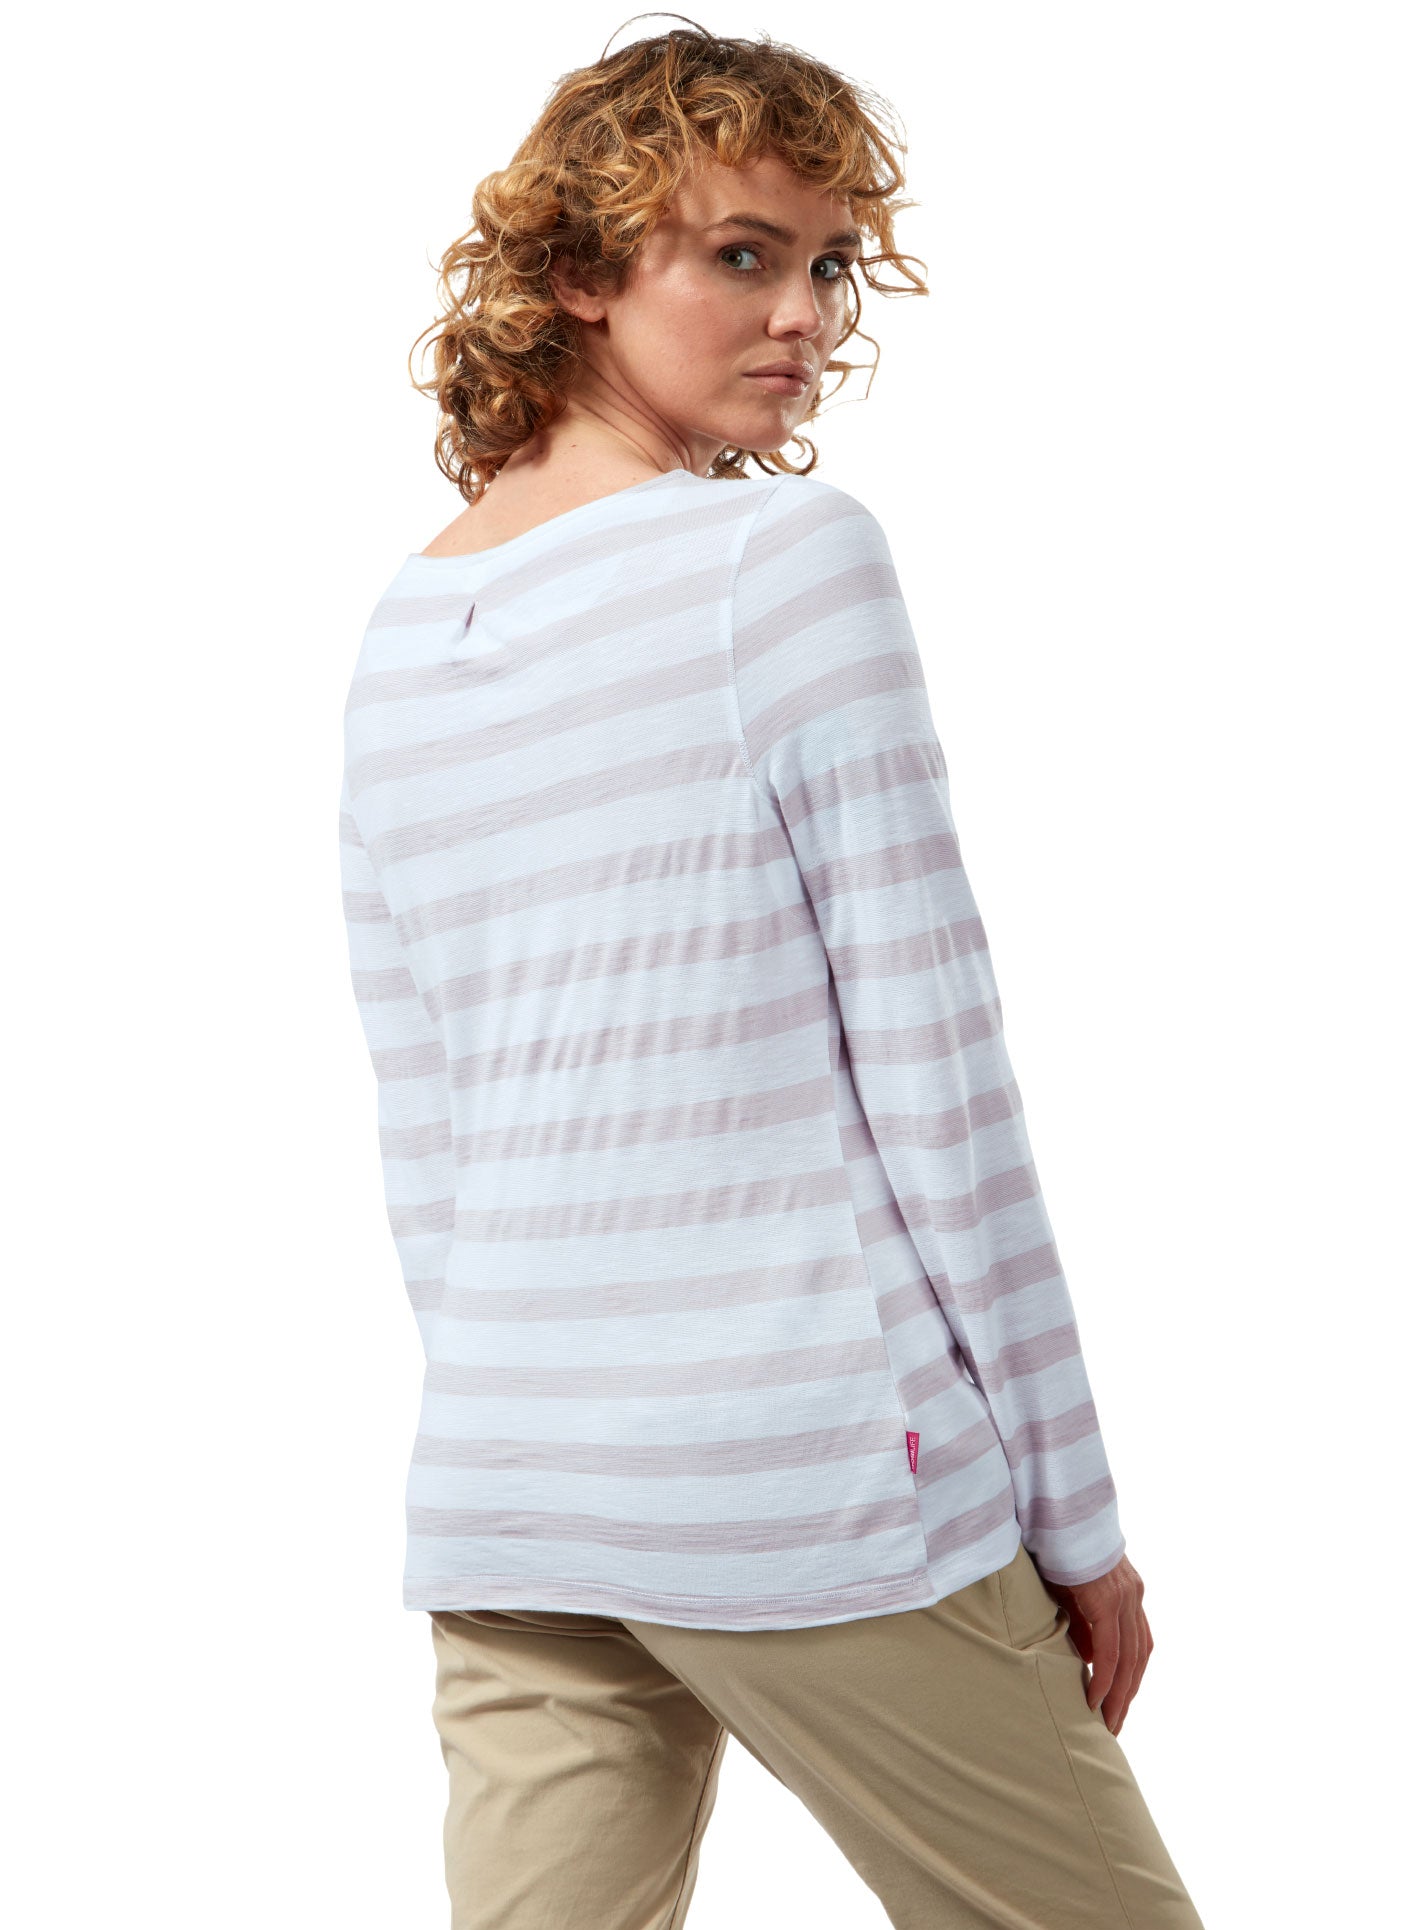 Brushed Lilac Stripe Ladies NosiLife Erin Long Sleeve Top by Craghoppers